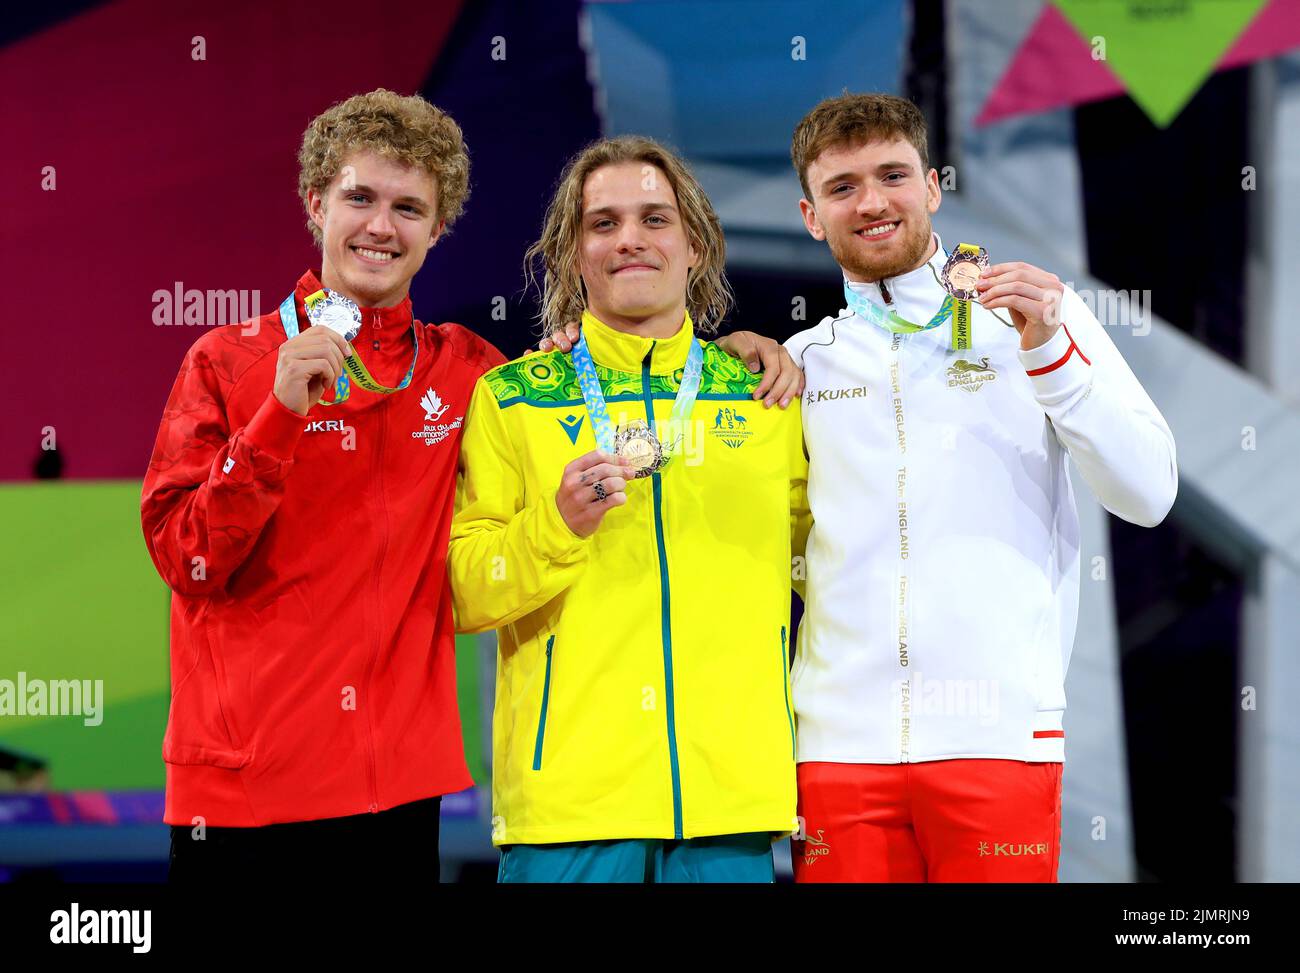 Australia's Cassiel Emmanuel Rousseau (centre) celebrates with his gold medal alongside Canada's Rylan Mackenzie Wiens (left) who finished second to take silver and England's Matthew Lee (right) who took bronze in the Men's 10m Platform Diving Final at Sandwell Aquatics Centre on day ten of the 2022 Commonwealth Games in Birmingham. Picture date: Sunday August 7, 2022. Stock Photo